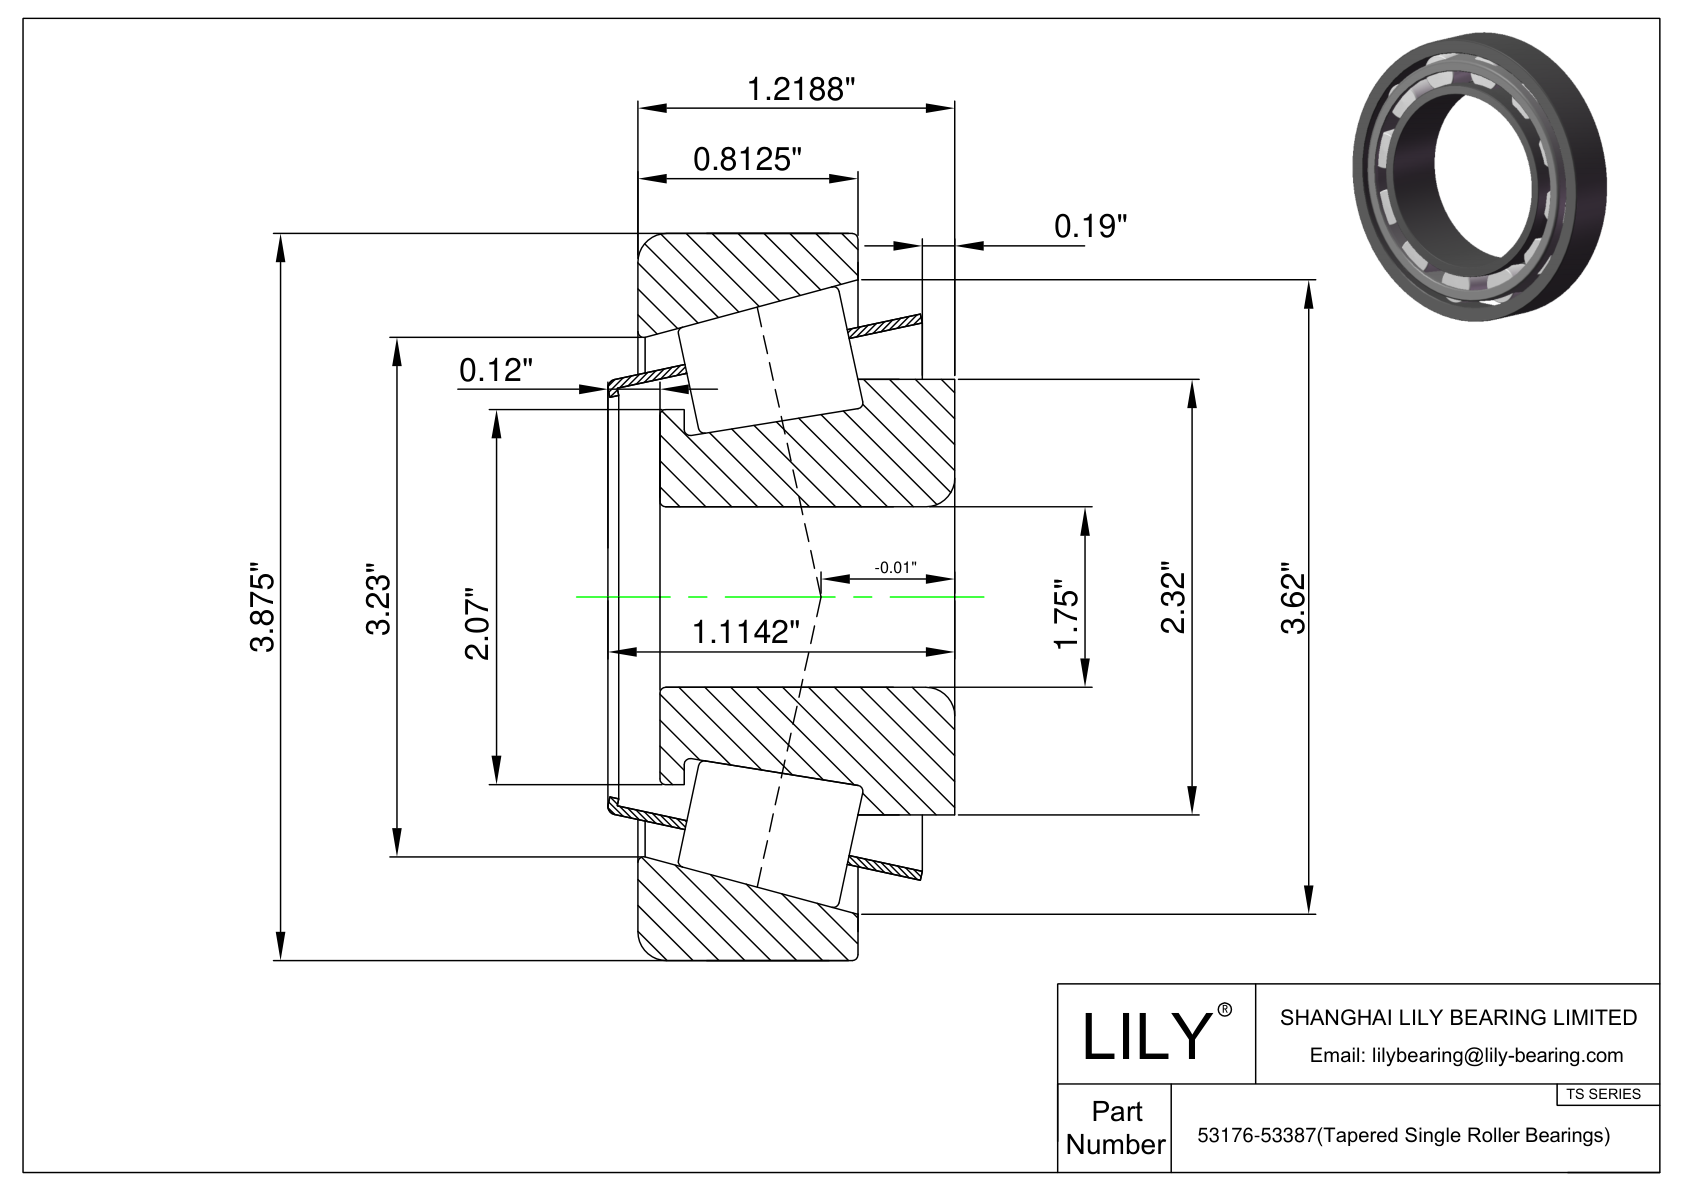 53176-53387 TS (Tapered Single Roller Bearings) (Imperial) cad drawing